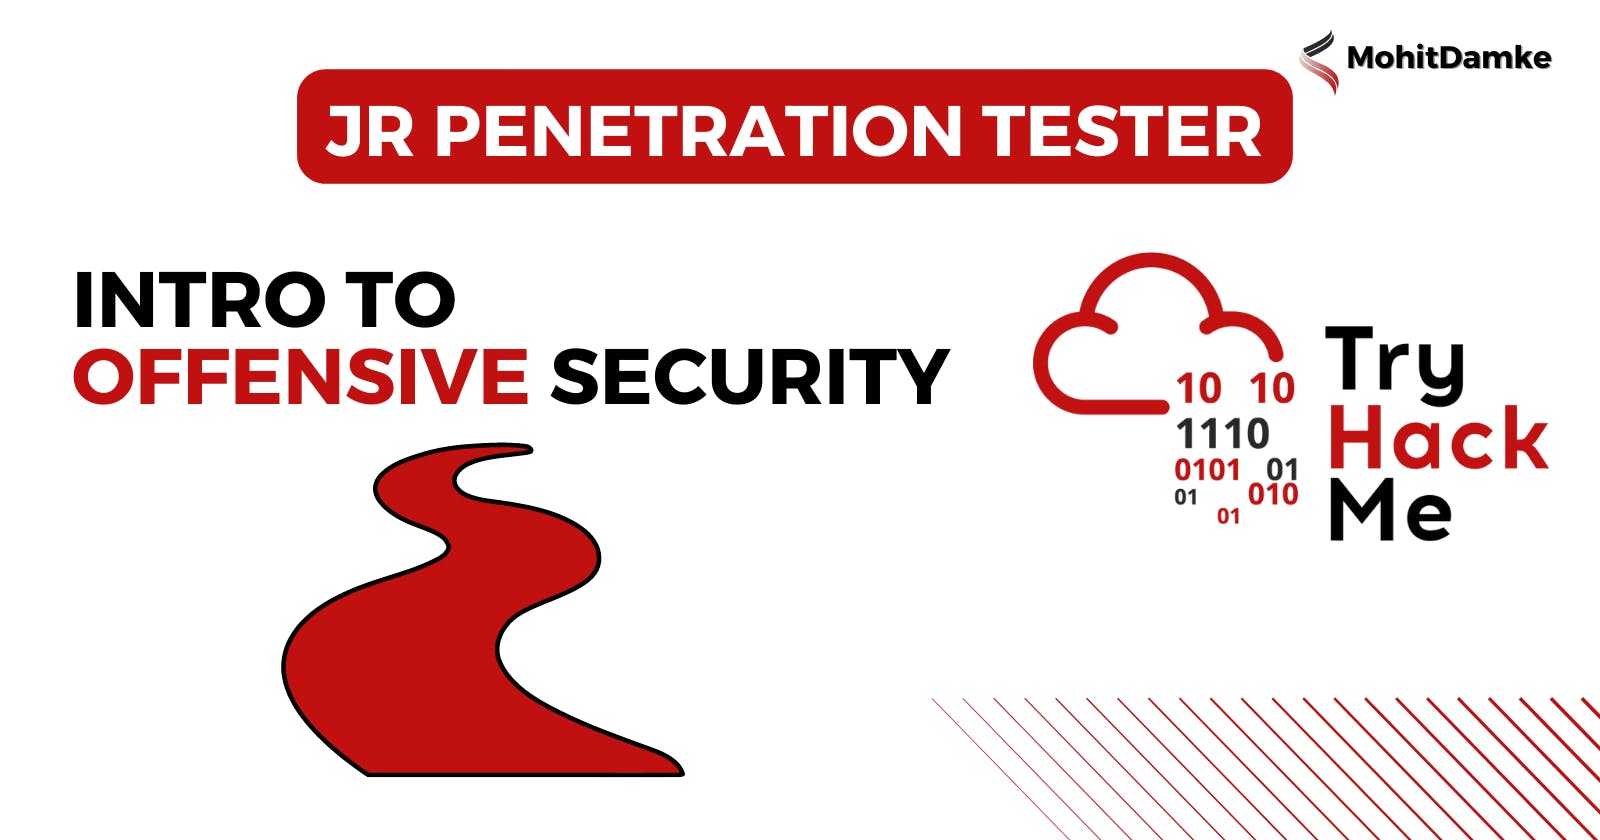 Try Hack Me |Jr Penetration Tester | Intro to Offensive Security | By Mohit Damke